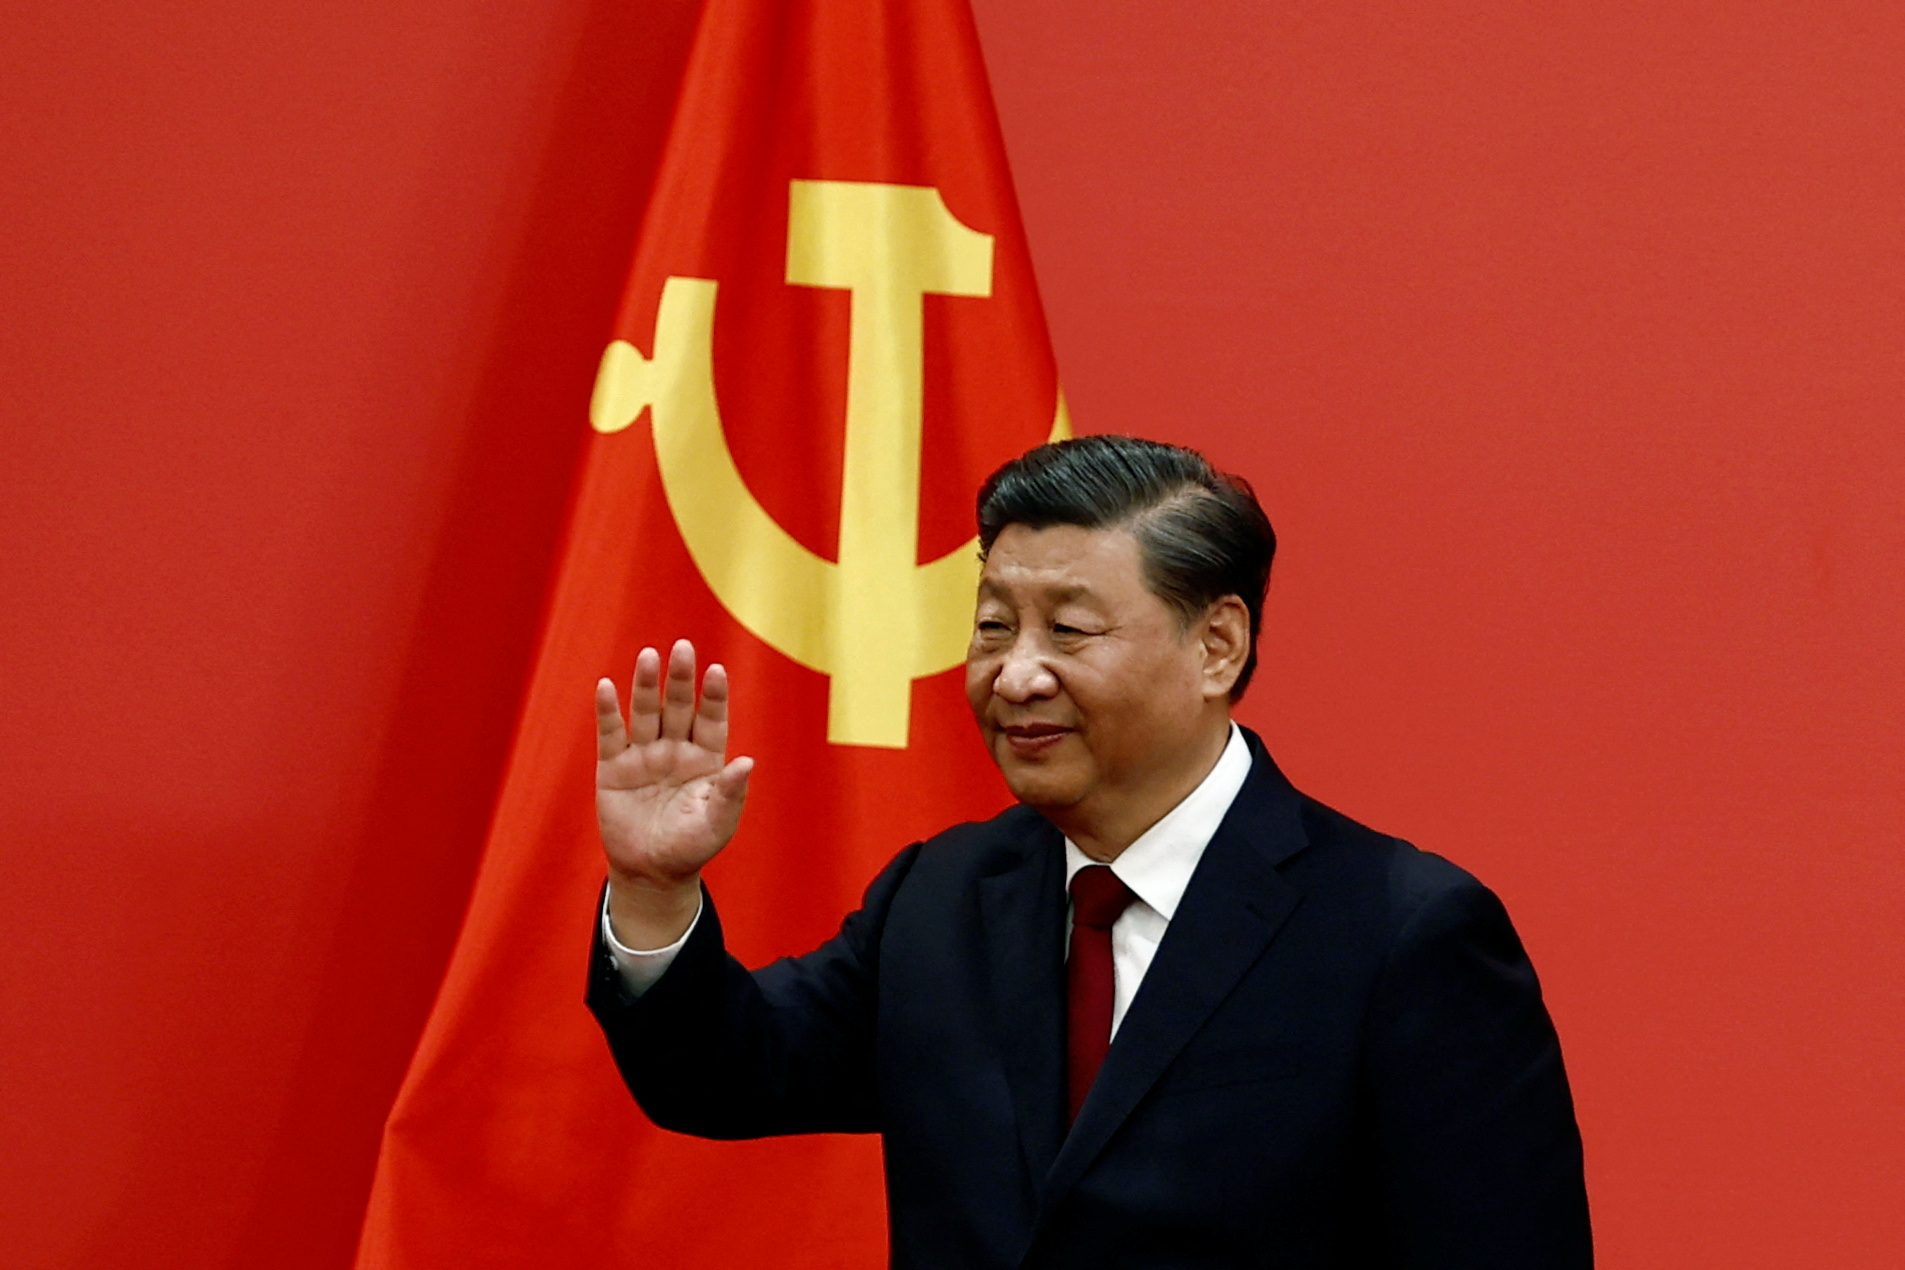 What does Xi Jinping's power move mean for China? | Brookings